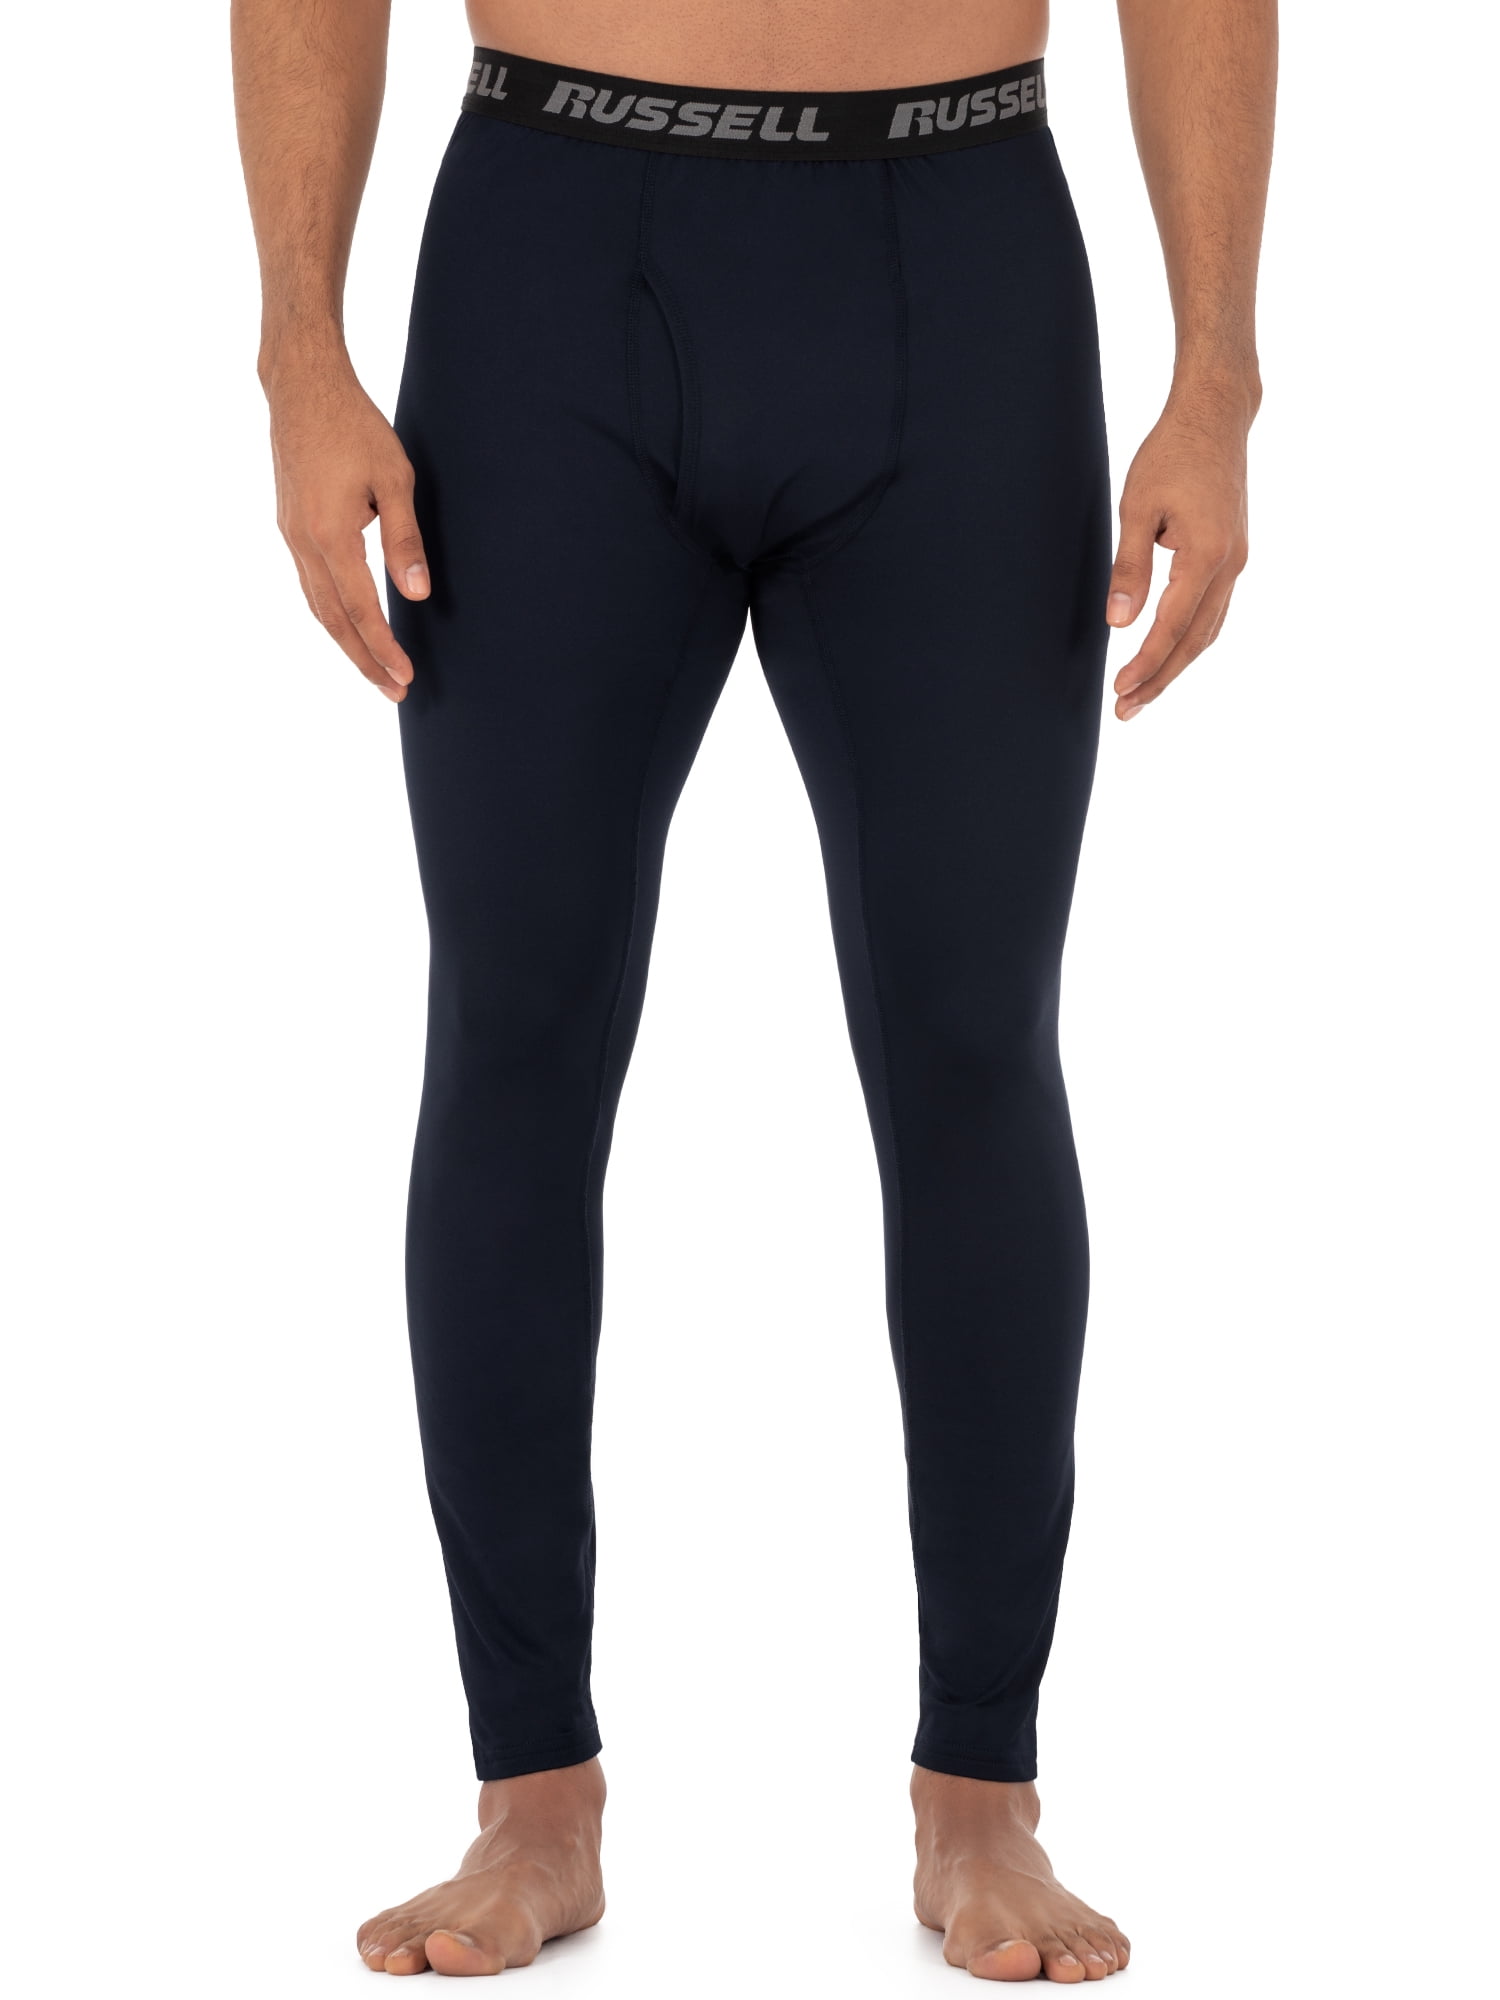 Men's Nike Element Thermal Running Tights Black/Silver Size Large :  : Clothing & Accessories